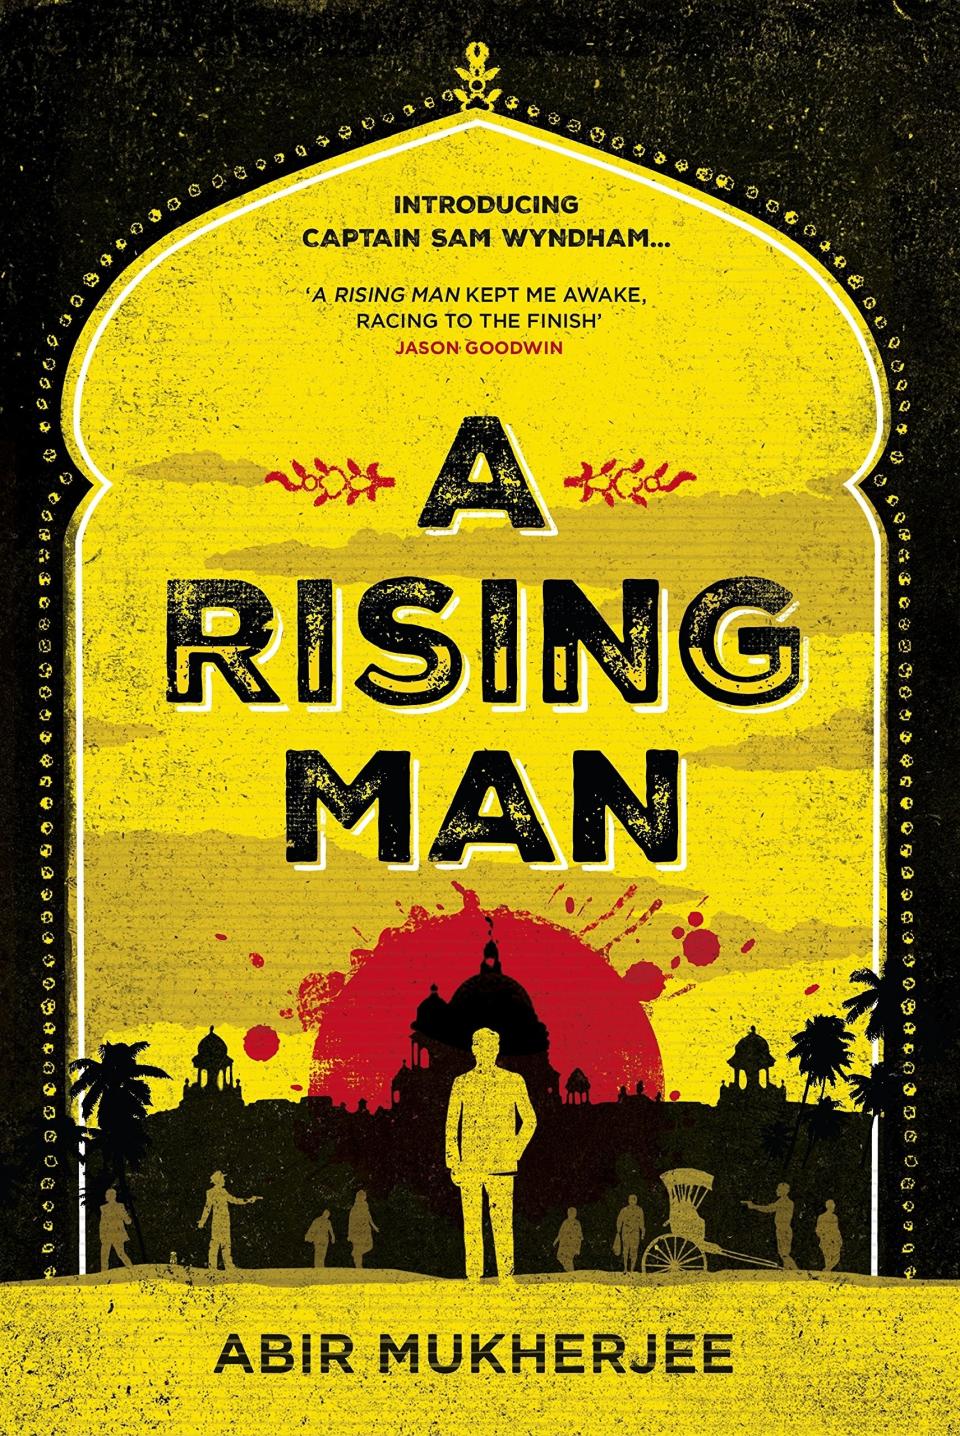 What it's about: In this first book of a historical crime series set in 1920s colonial India, British captain Sam Wyndham and native Sergeant Banerjee investigate the murder of a senior officer in the British Raj. With a vividly drawn Calcutta setting and constantly simmering racial/political tensions, A Rising Man is drily funny and compelling, and if you like this, there are four more in the series to discover. Get it from Bookshop or through your local indie through Indiebound here.